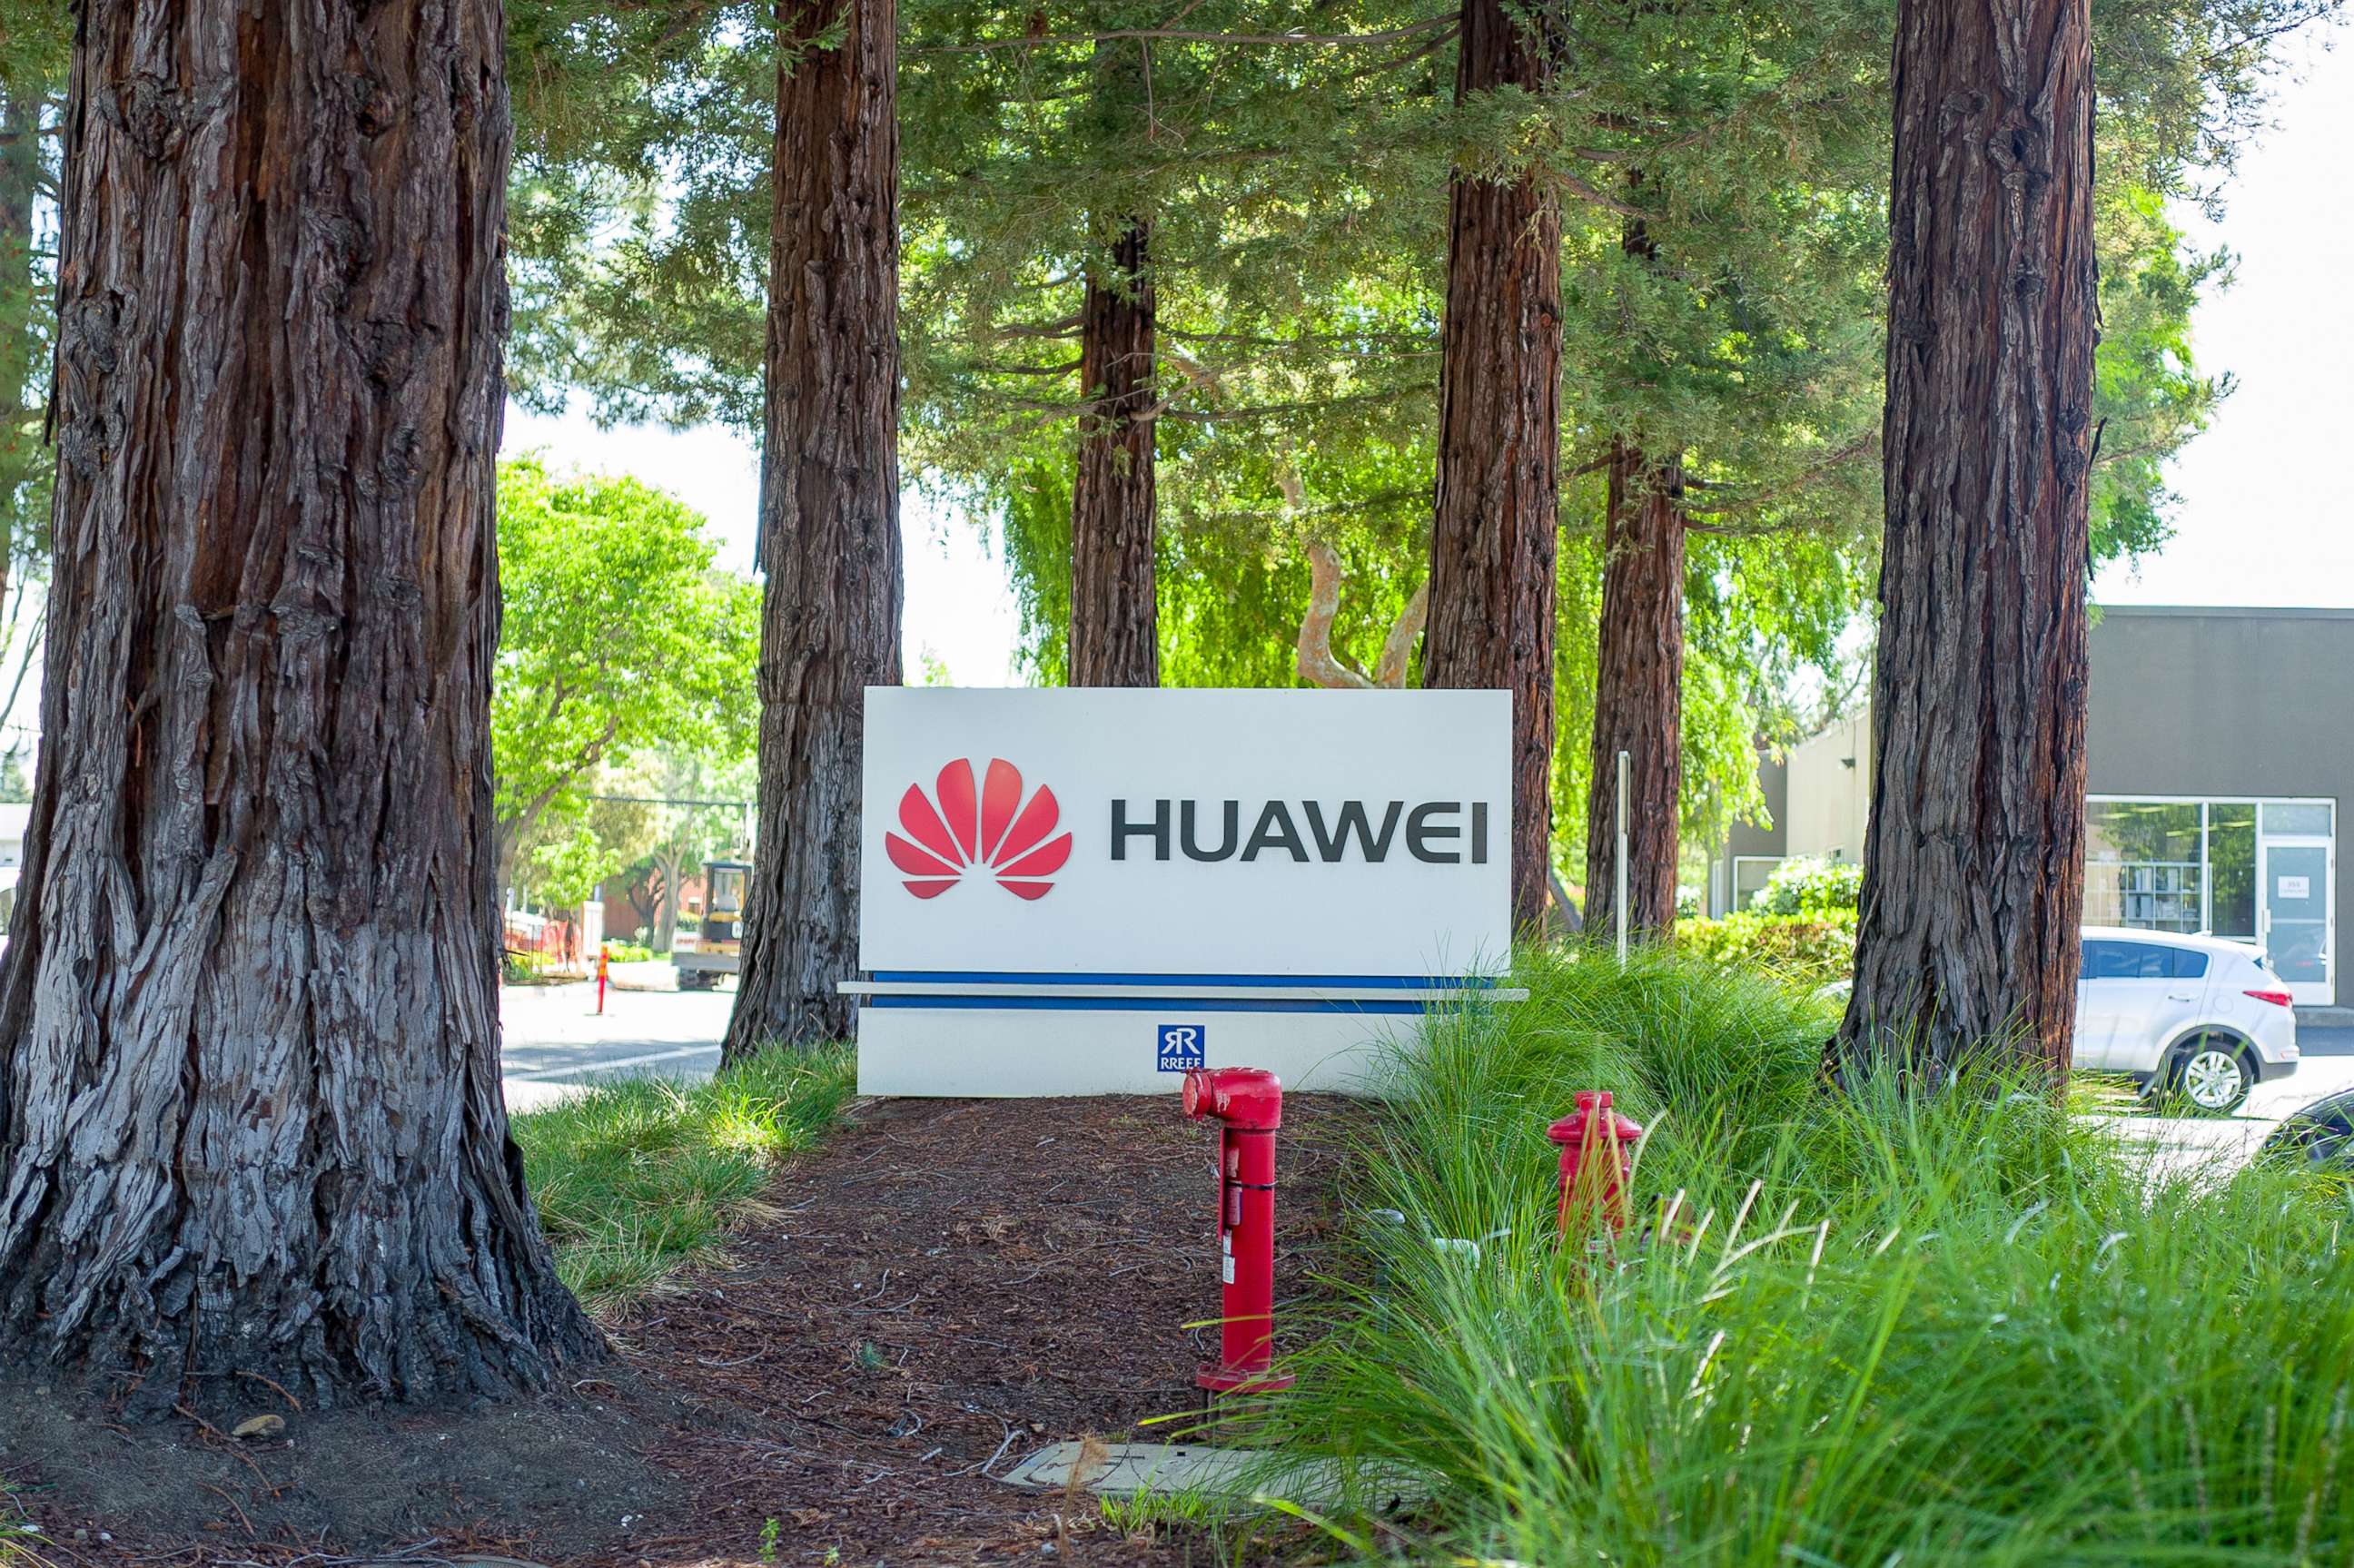 PHOTO: In this May 3, 2019, file photo, a sign is shown at the entrance to the offices of Chinese networking equipment company Huawei in Mountain View, Calif.